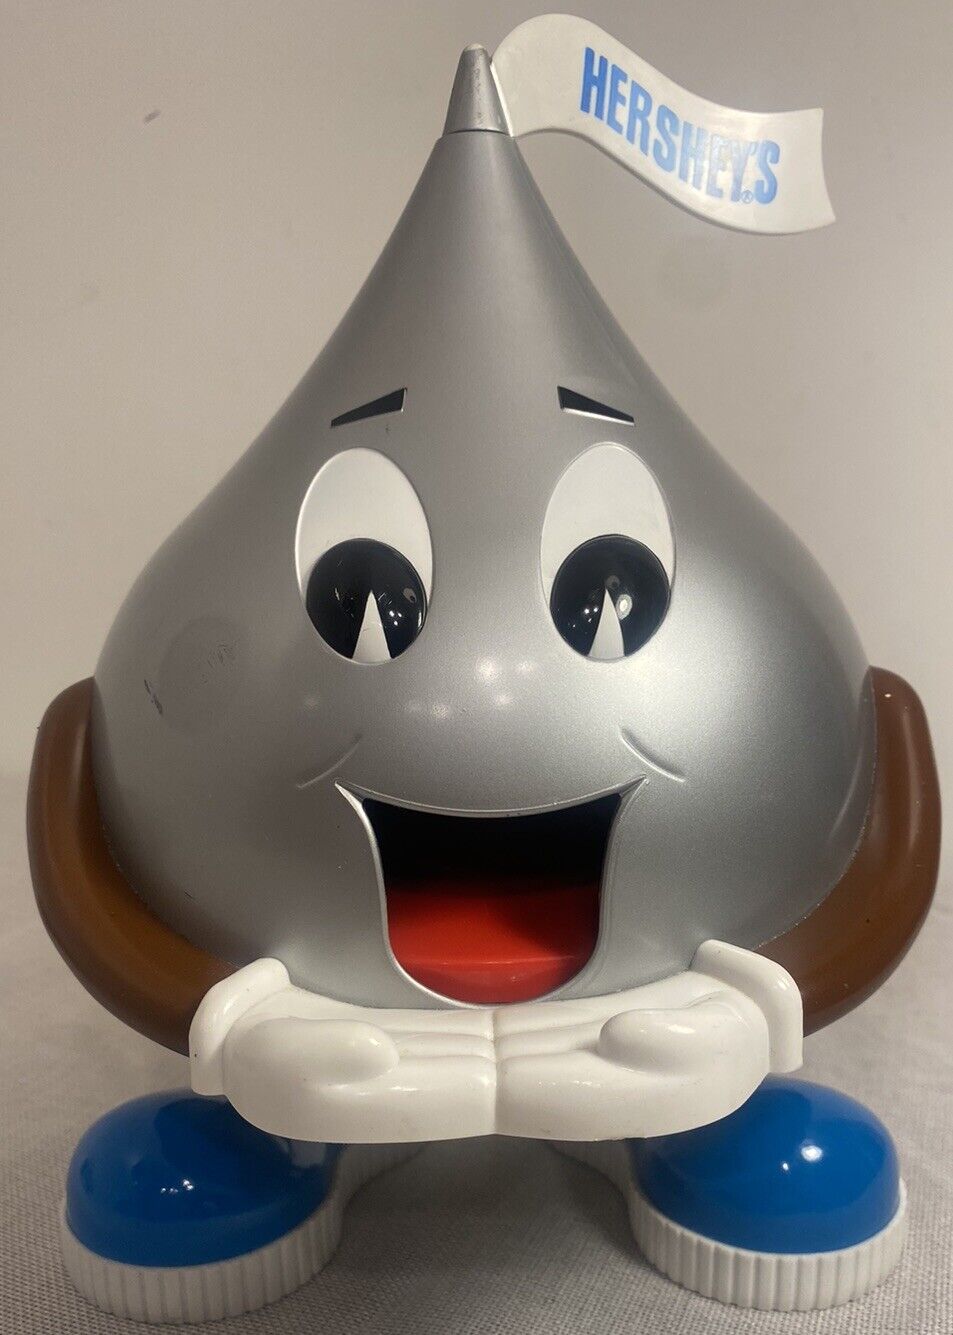 Vintage 1995 Hershey\'s Kiss Toy Candy Rotating Chocolate Kiss Dispenser Hershey